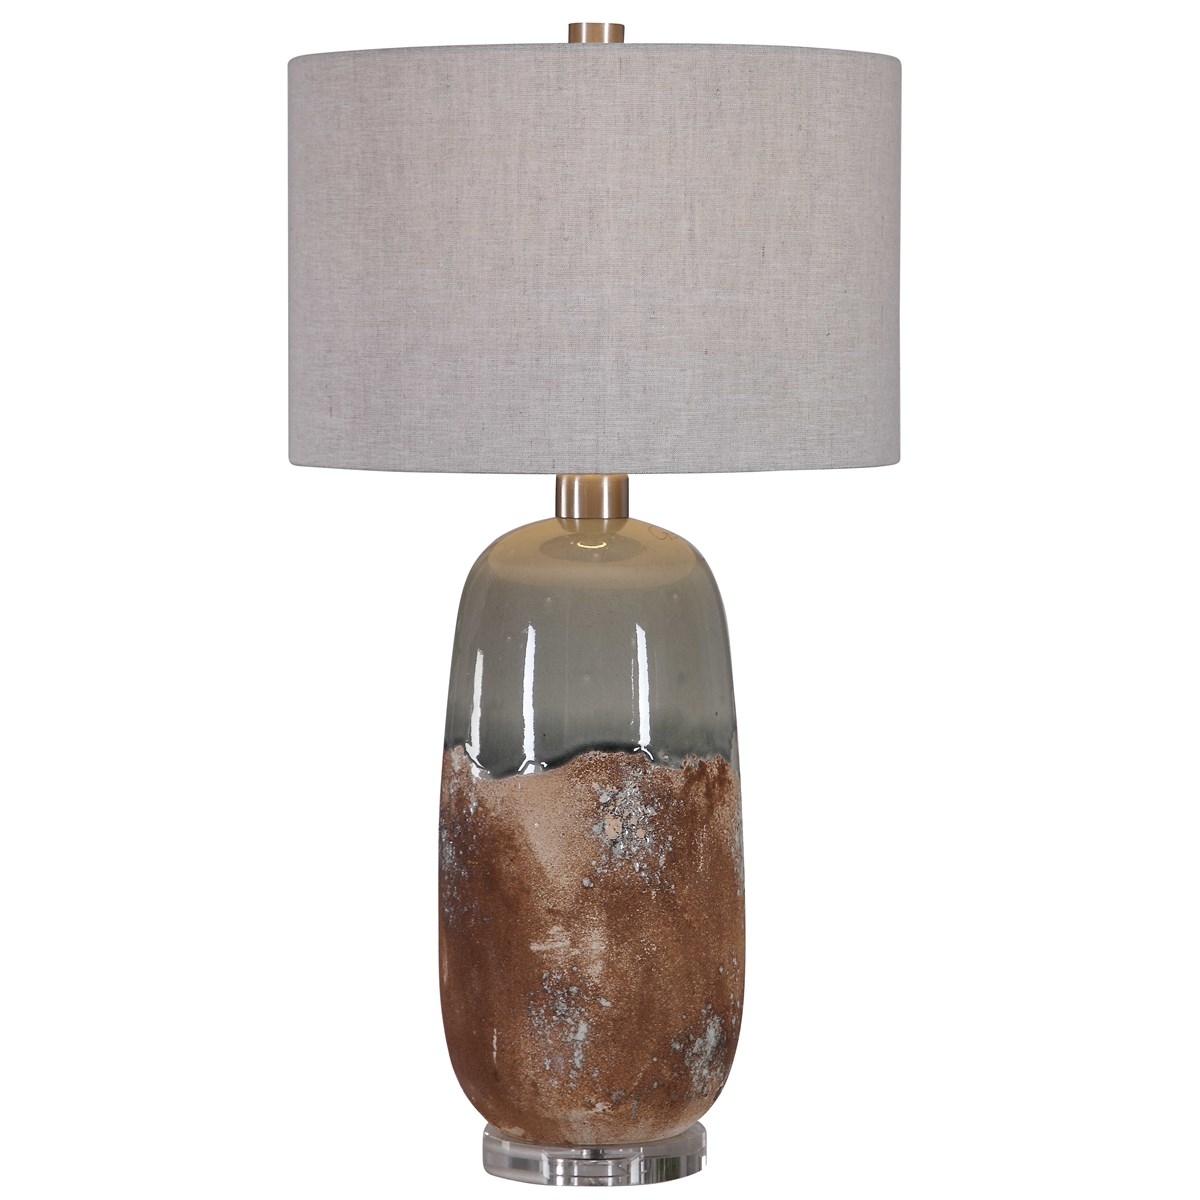 MAGGIE TABLE LAMP - Image 2